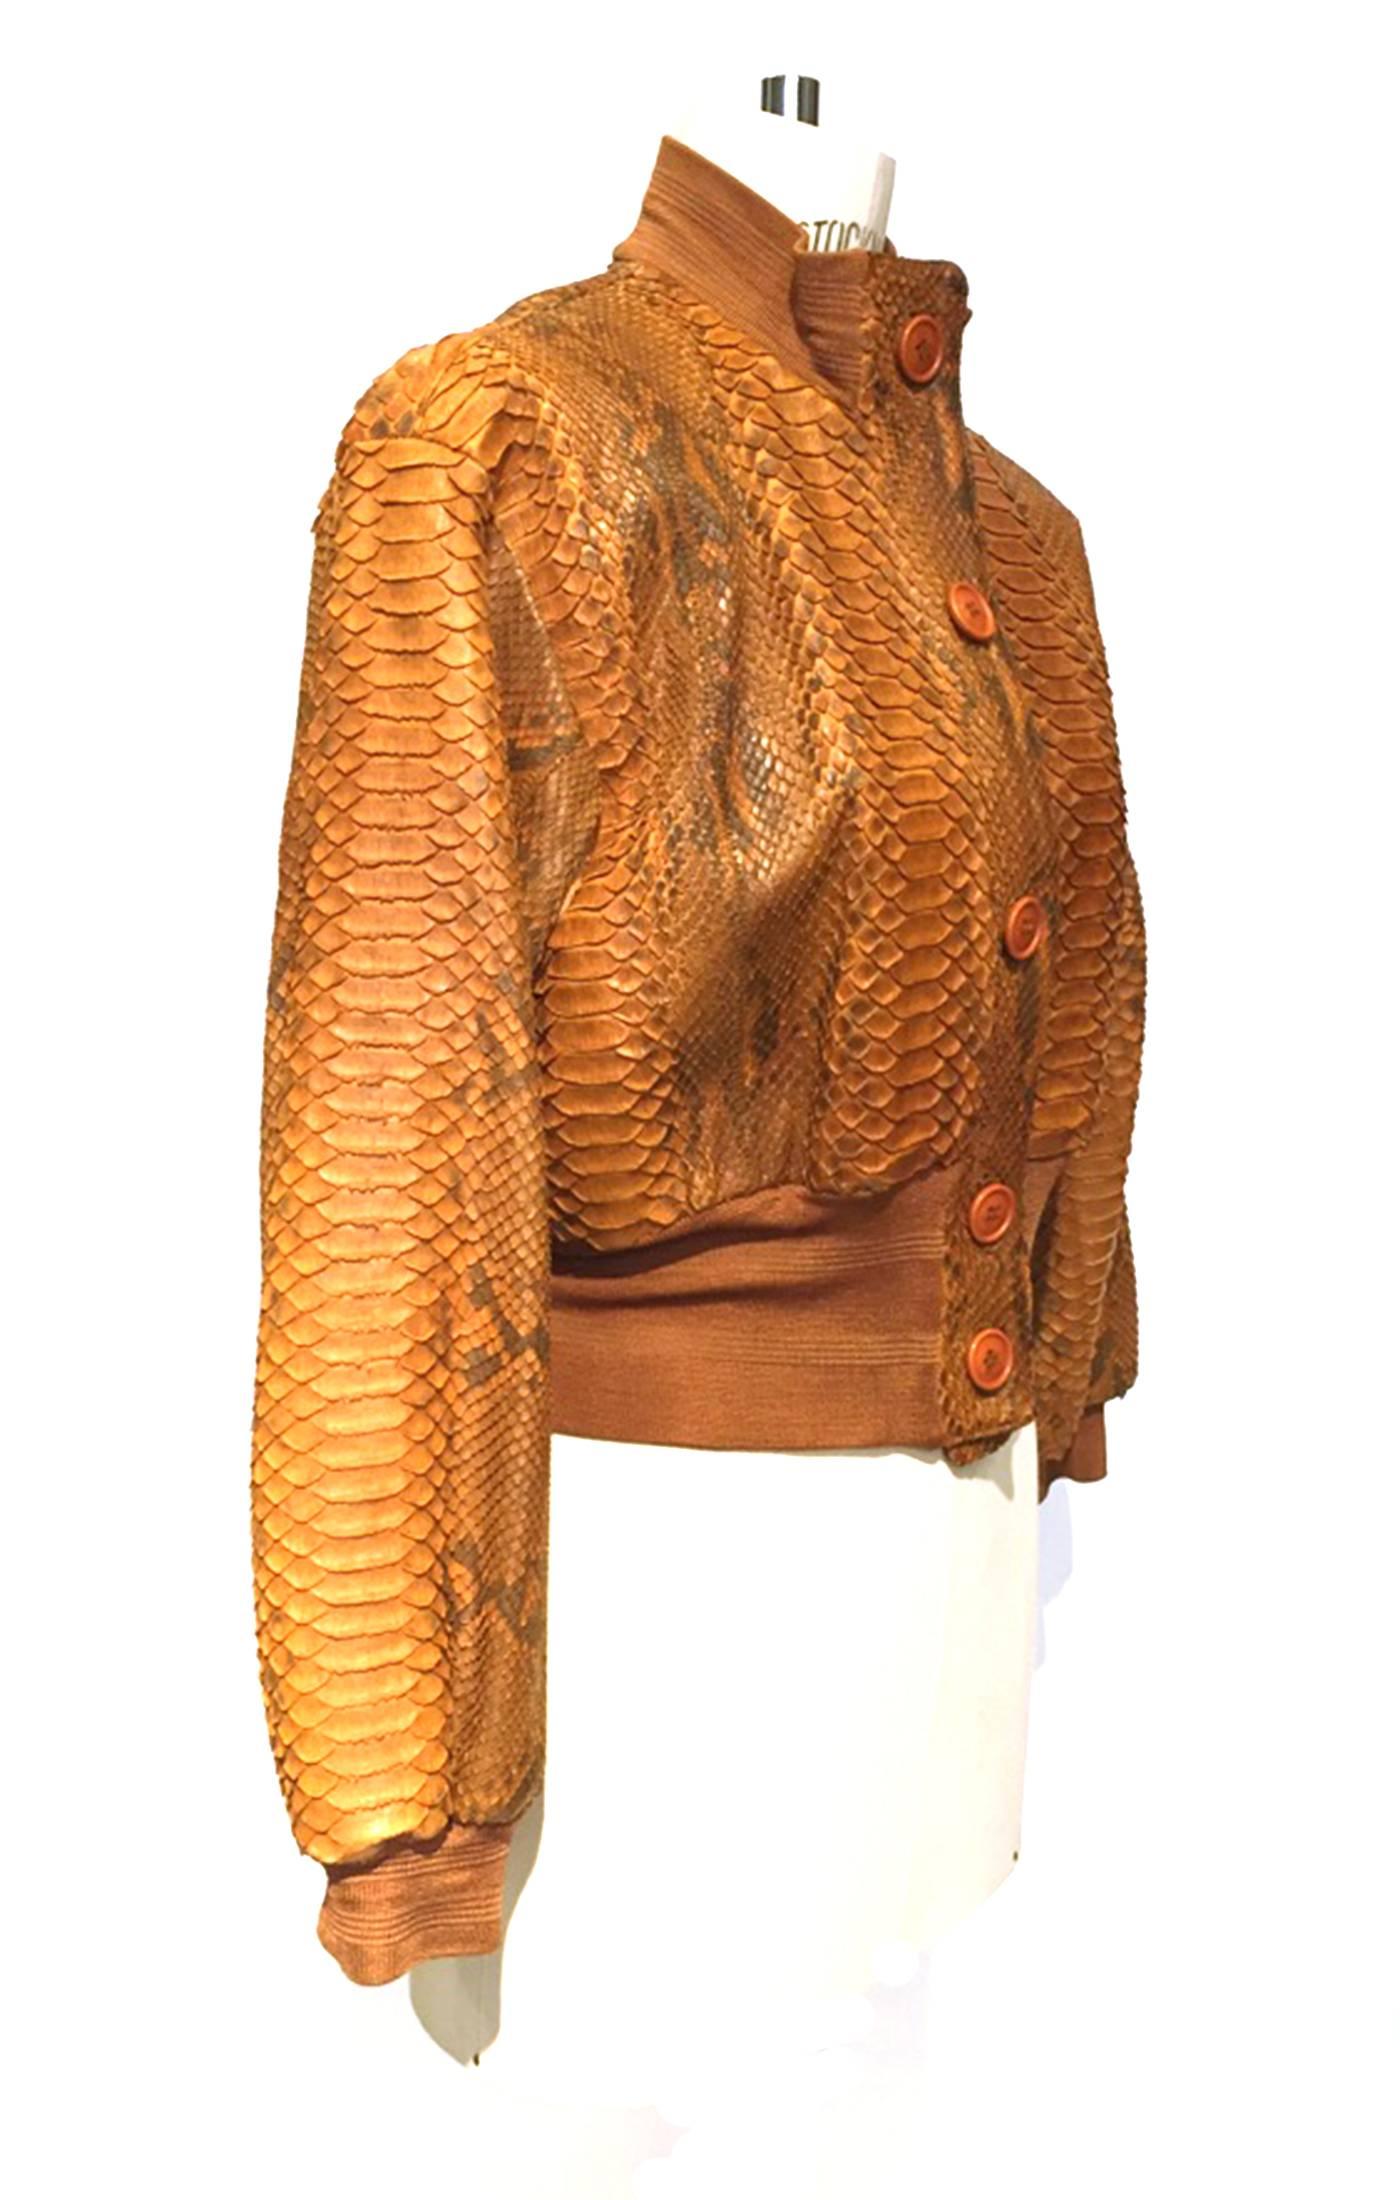 Amazing Gianfranco Ferre vintage python bomber jacket from mid 1990s. Natural python snakeskin leather shell retaining original tan, beige. Bomber jacket style, shorter length, banded waist. Tan silk lining. 2 front pockets. 4 button front closure.